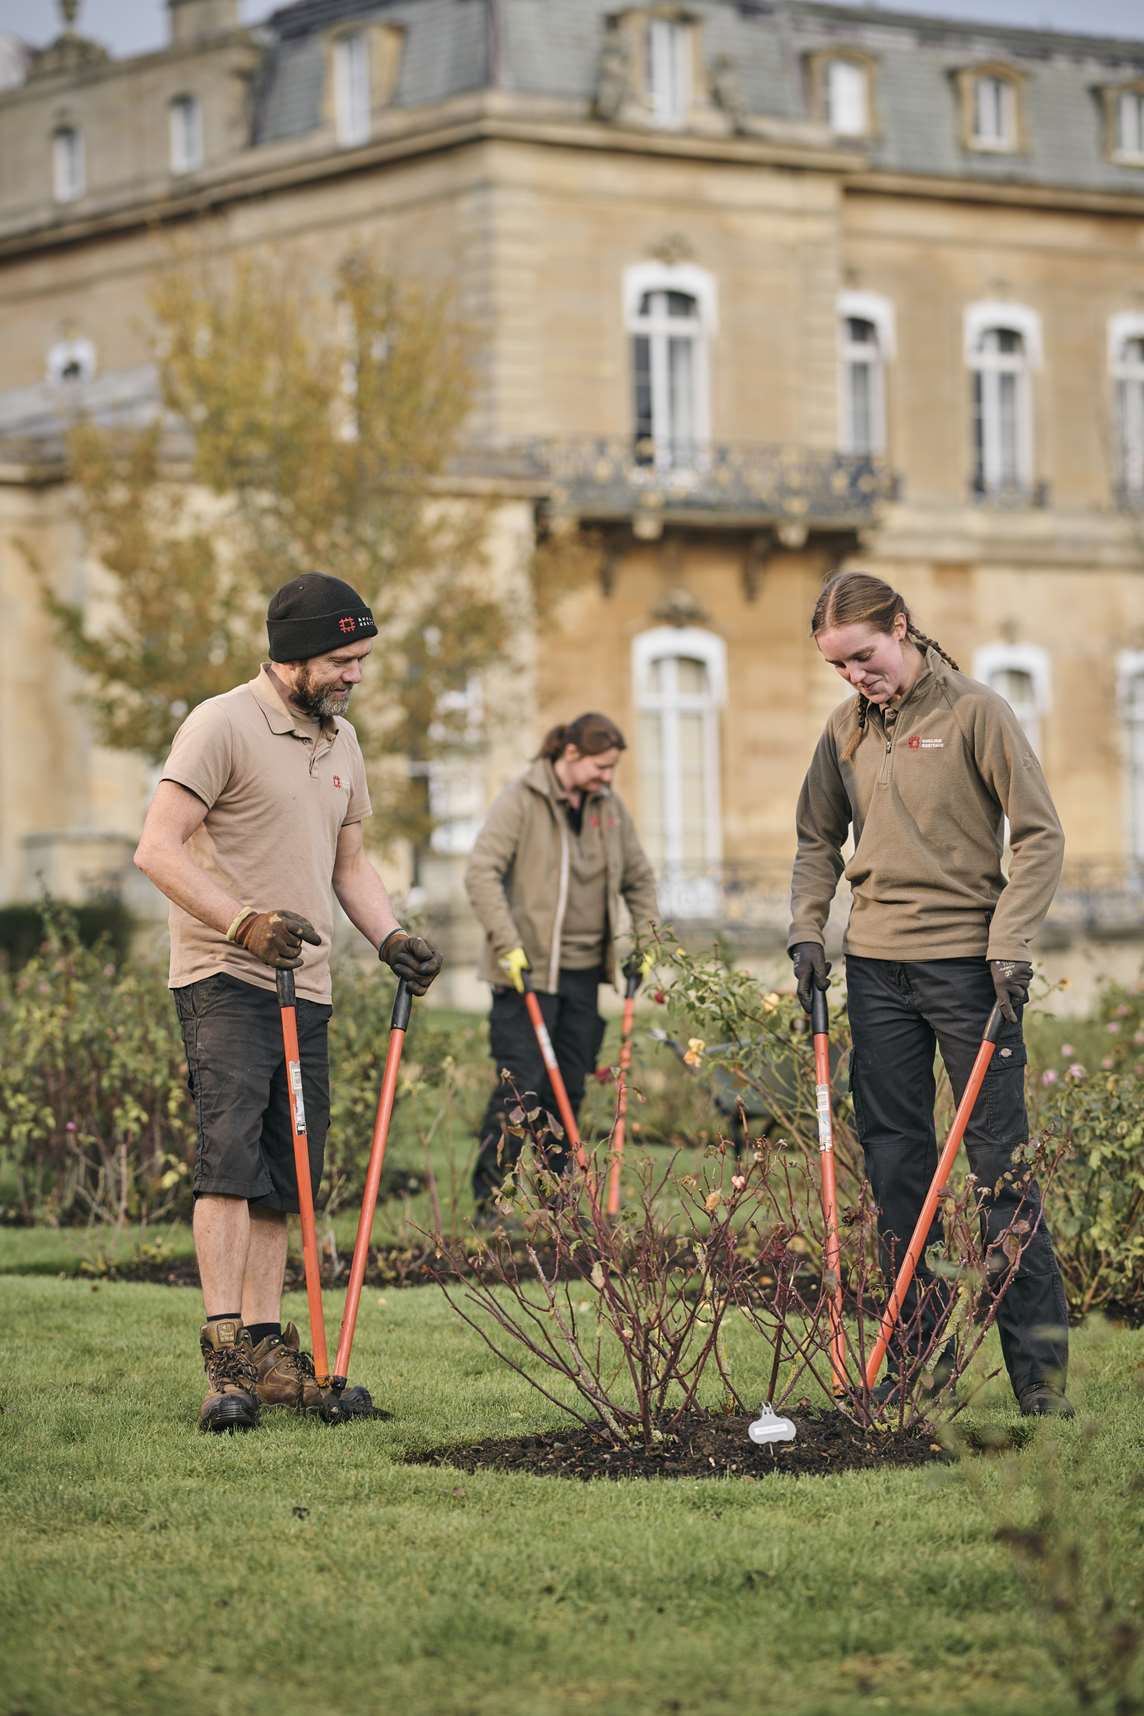 Image: Gardeners working in the grounds of Wrest Park